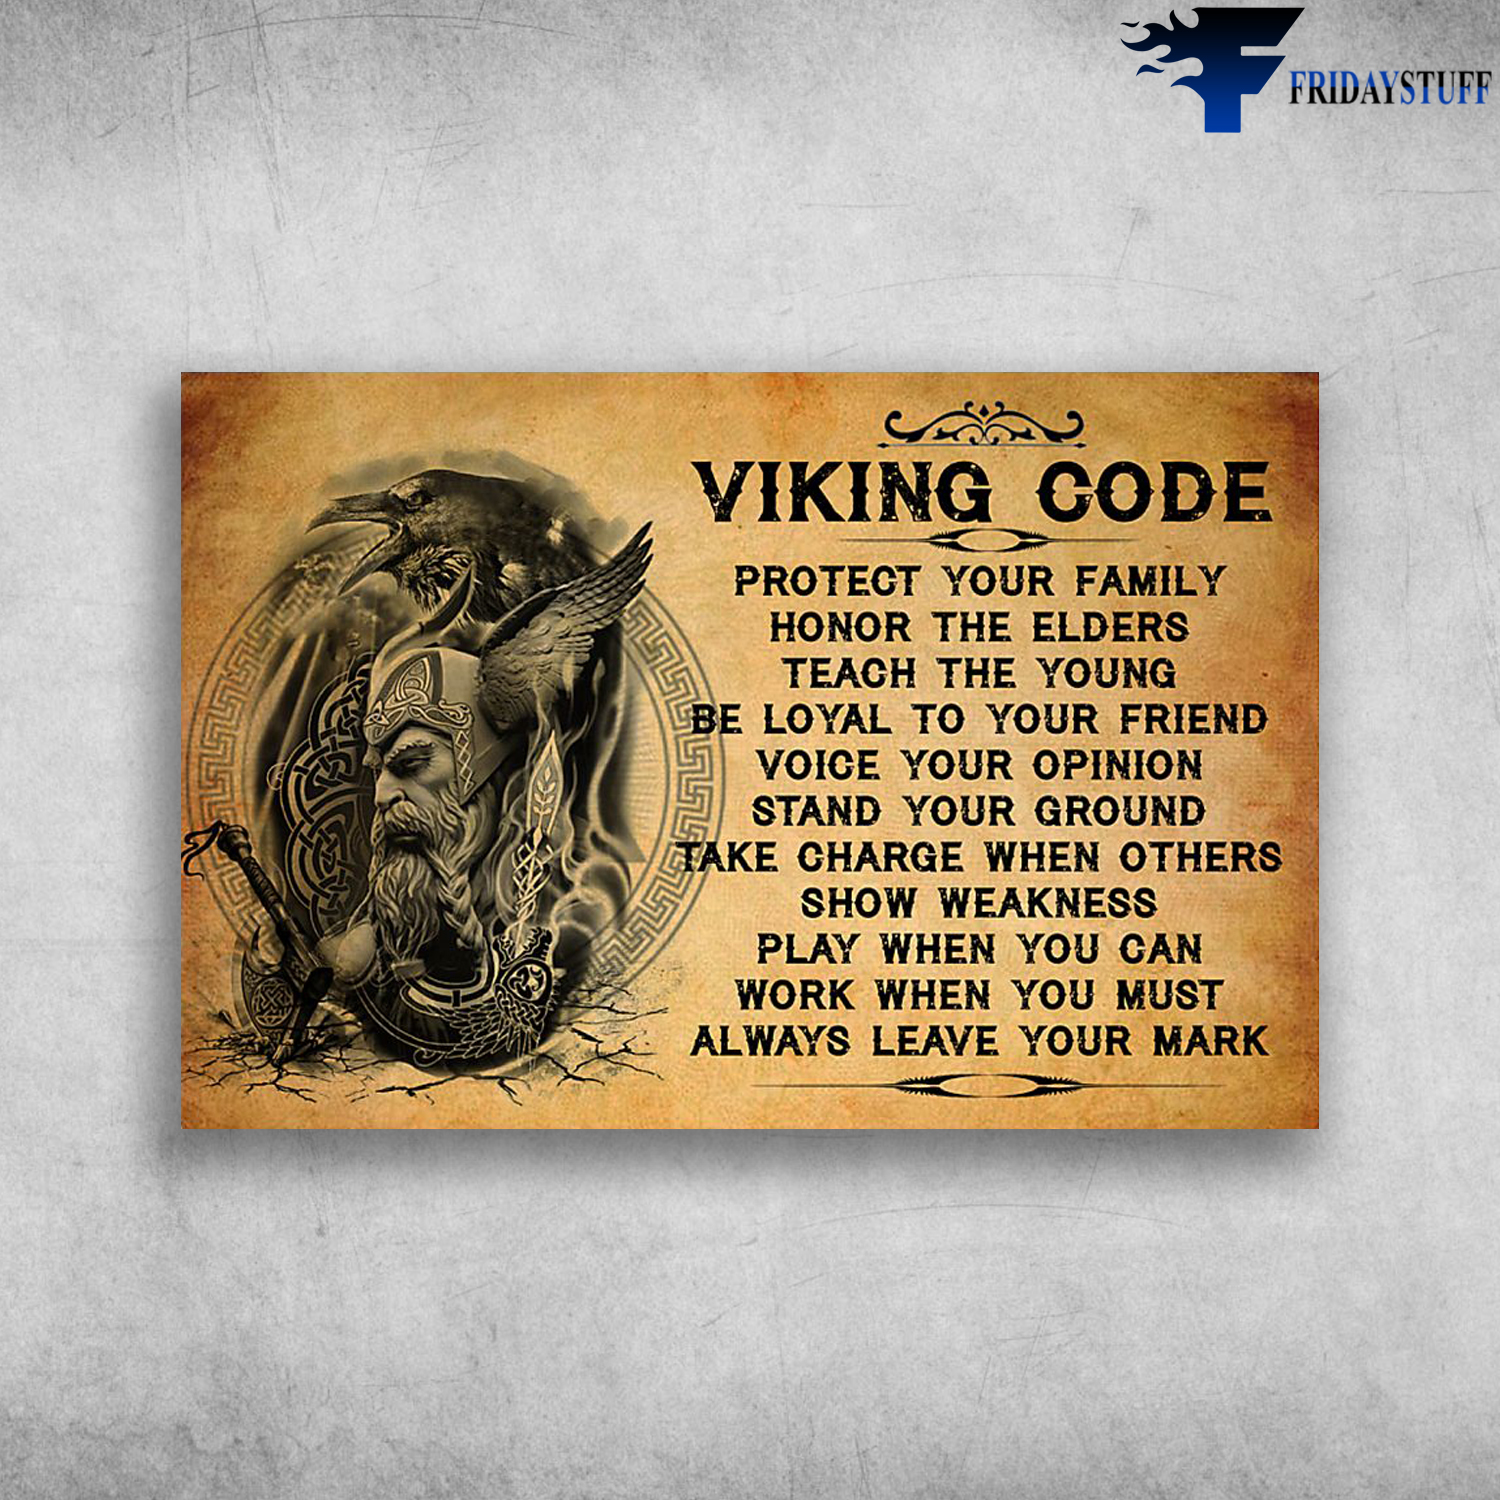 The Vikings With The Ax And Blackbird - Viking Code Protect Your Family